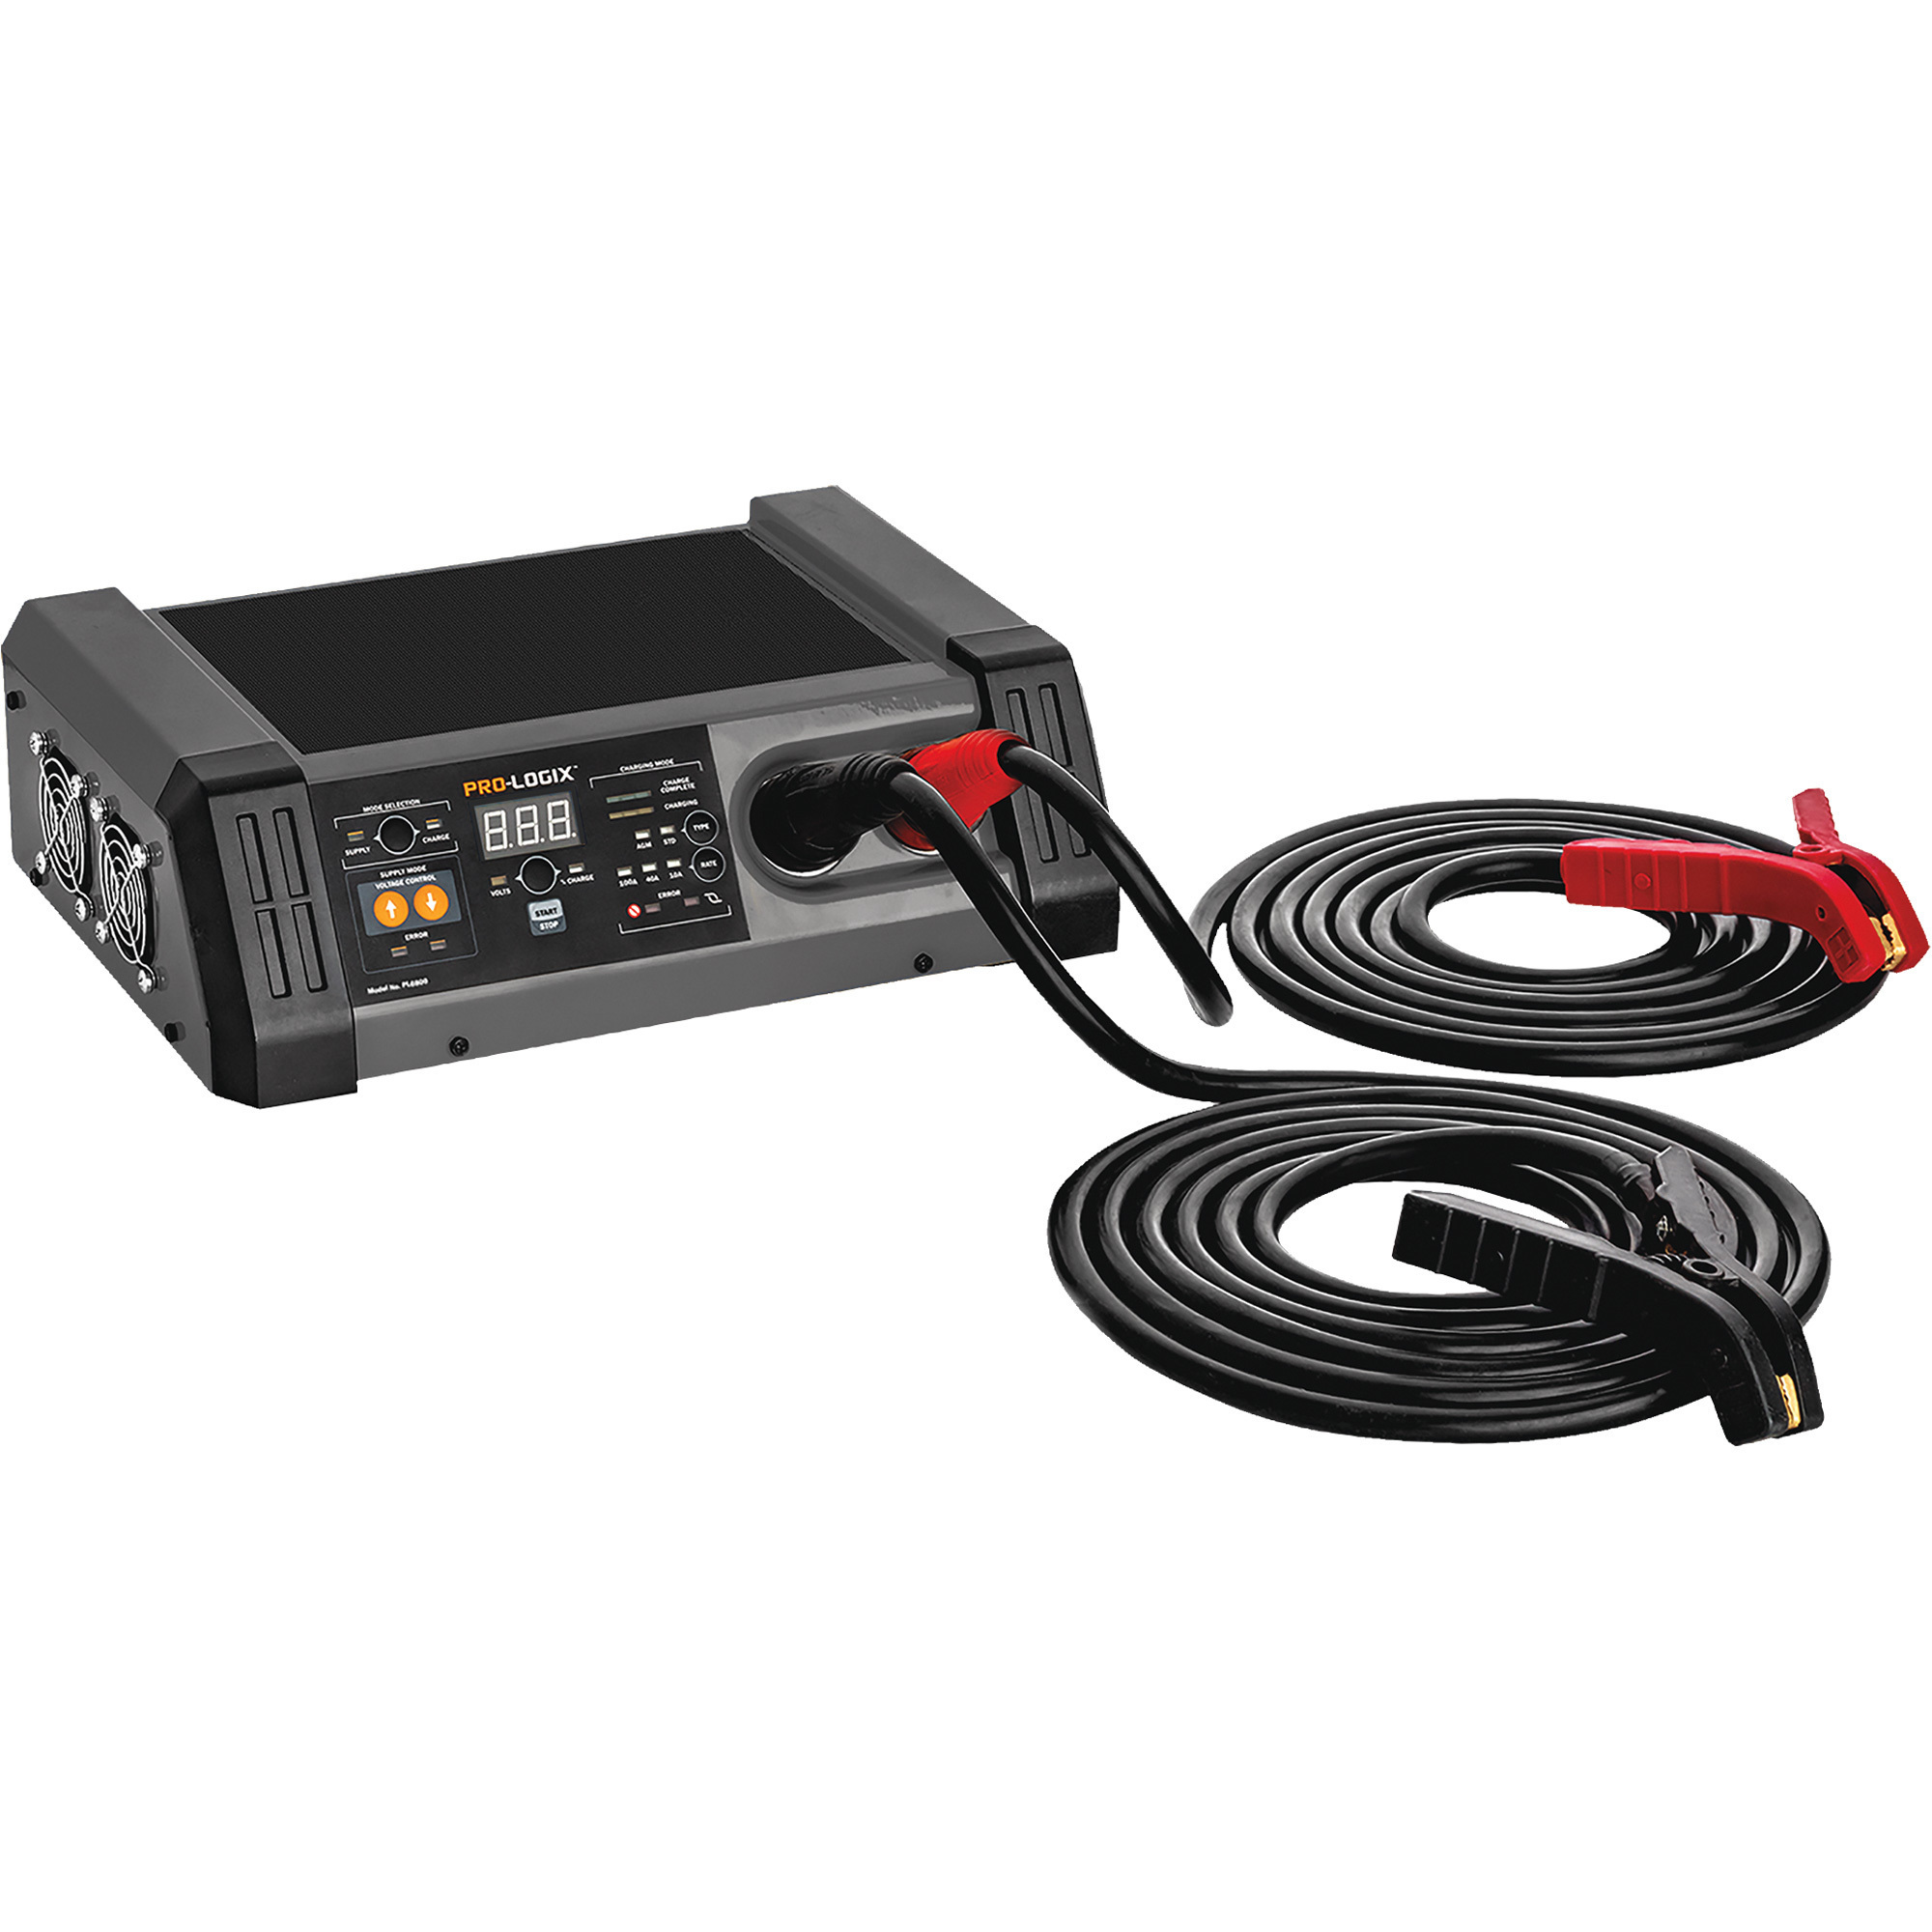 Pro-Logix Flashing Power Supply/Heavy-Duty Battery Charger, 12 Volts, 100 Amps, Model PL6800